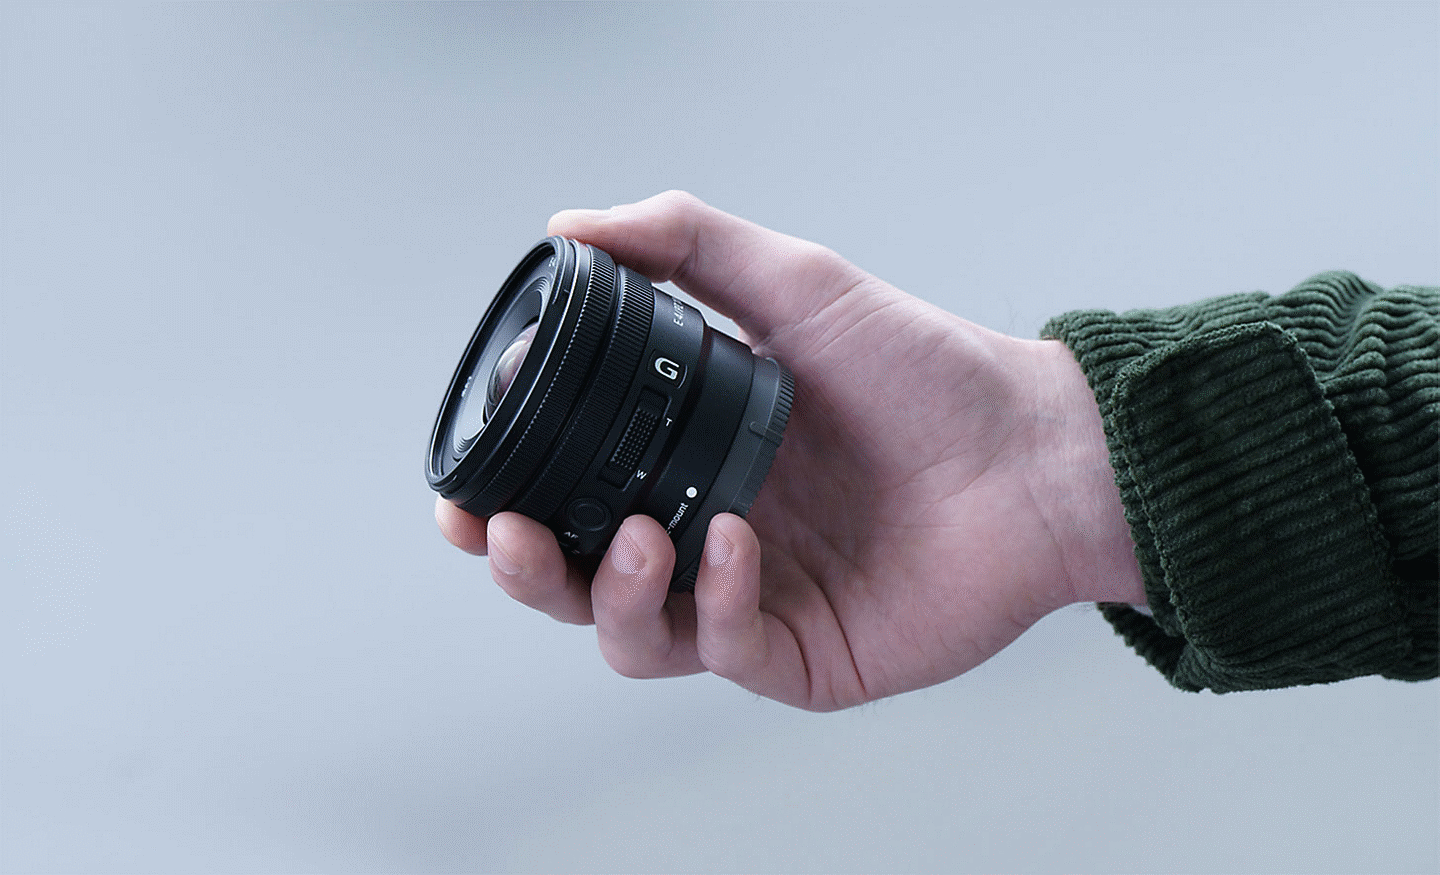 Image of a person's hand holding the E PZ 10-20mm F4 G, showing that the lens is small enough to fit in their hand